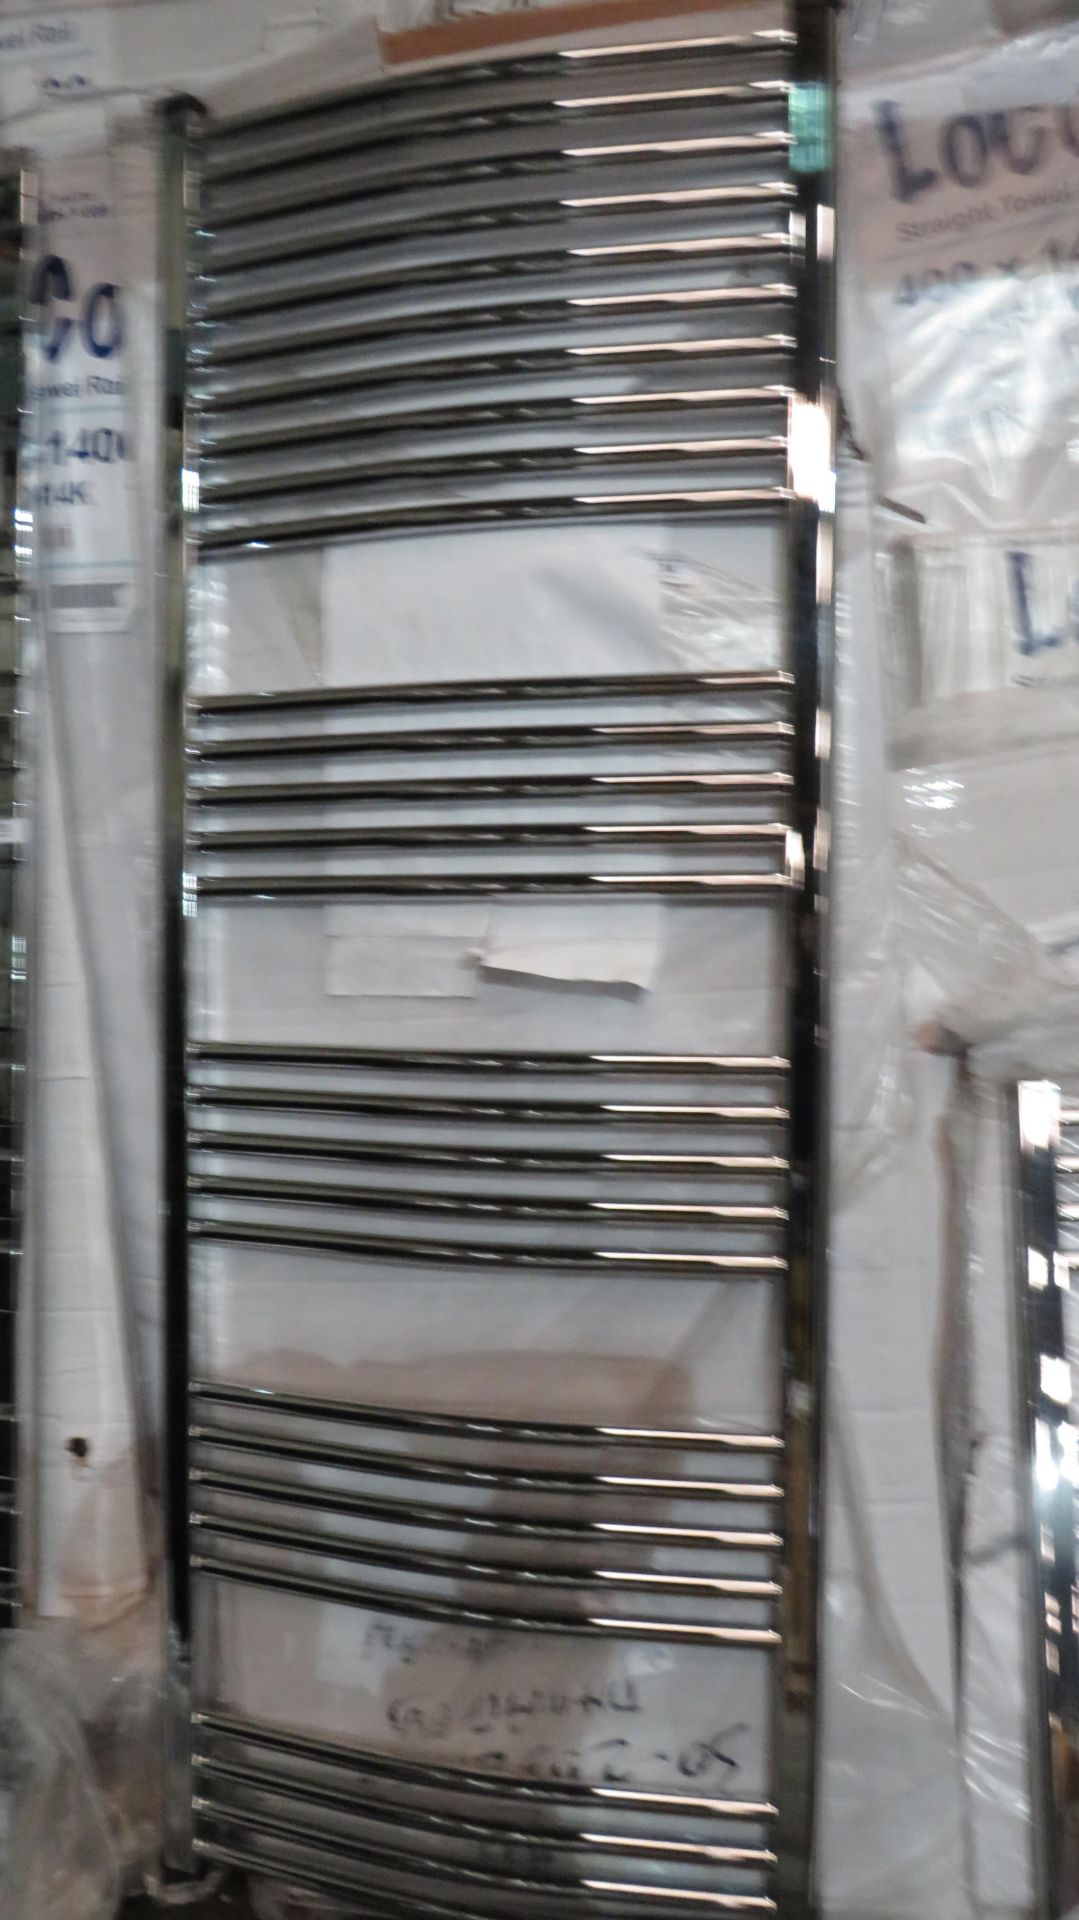 Loco 600x1600mm curved towel radiator, Please note, this radiator is ex-display and may contain